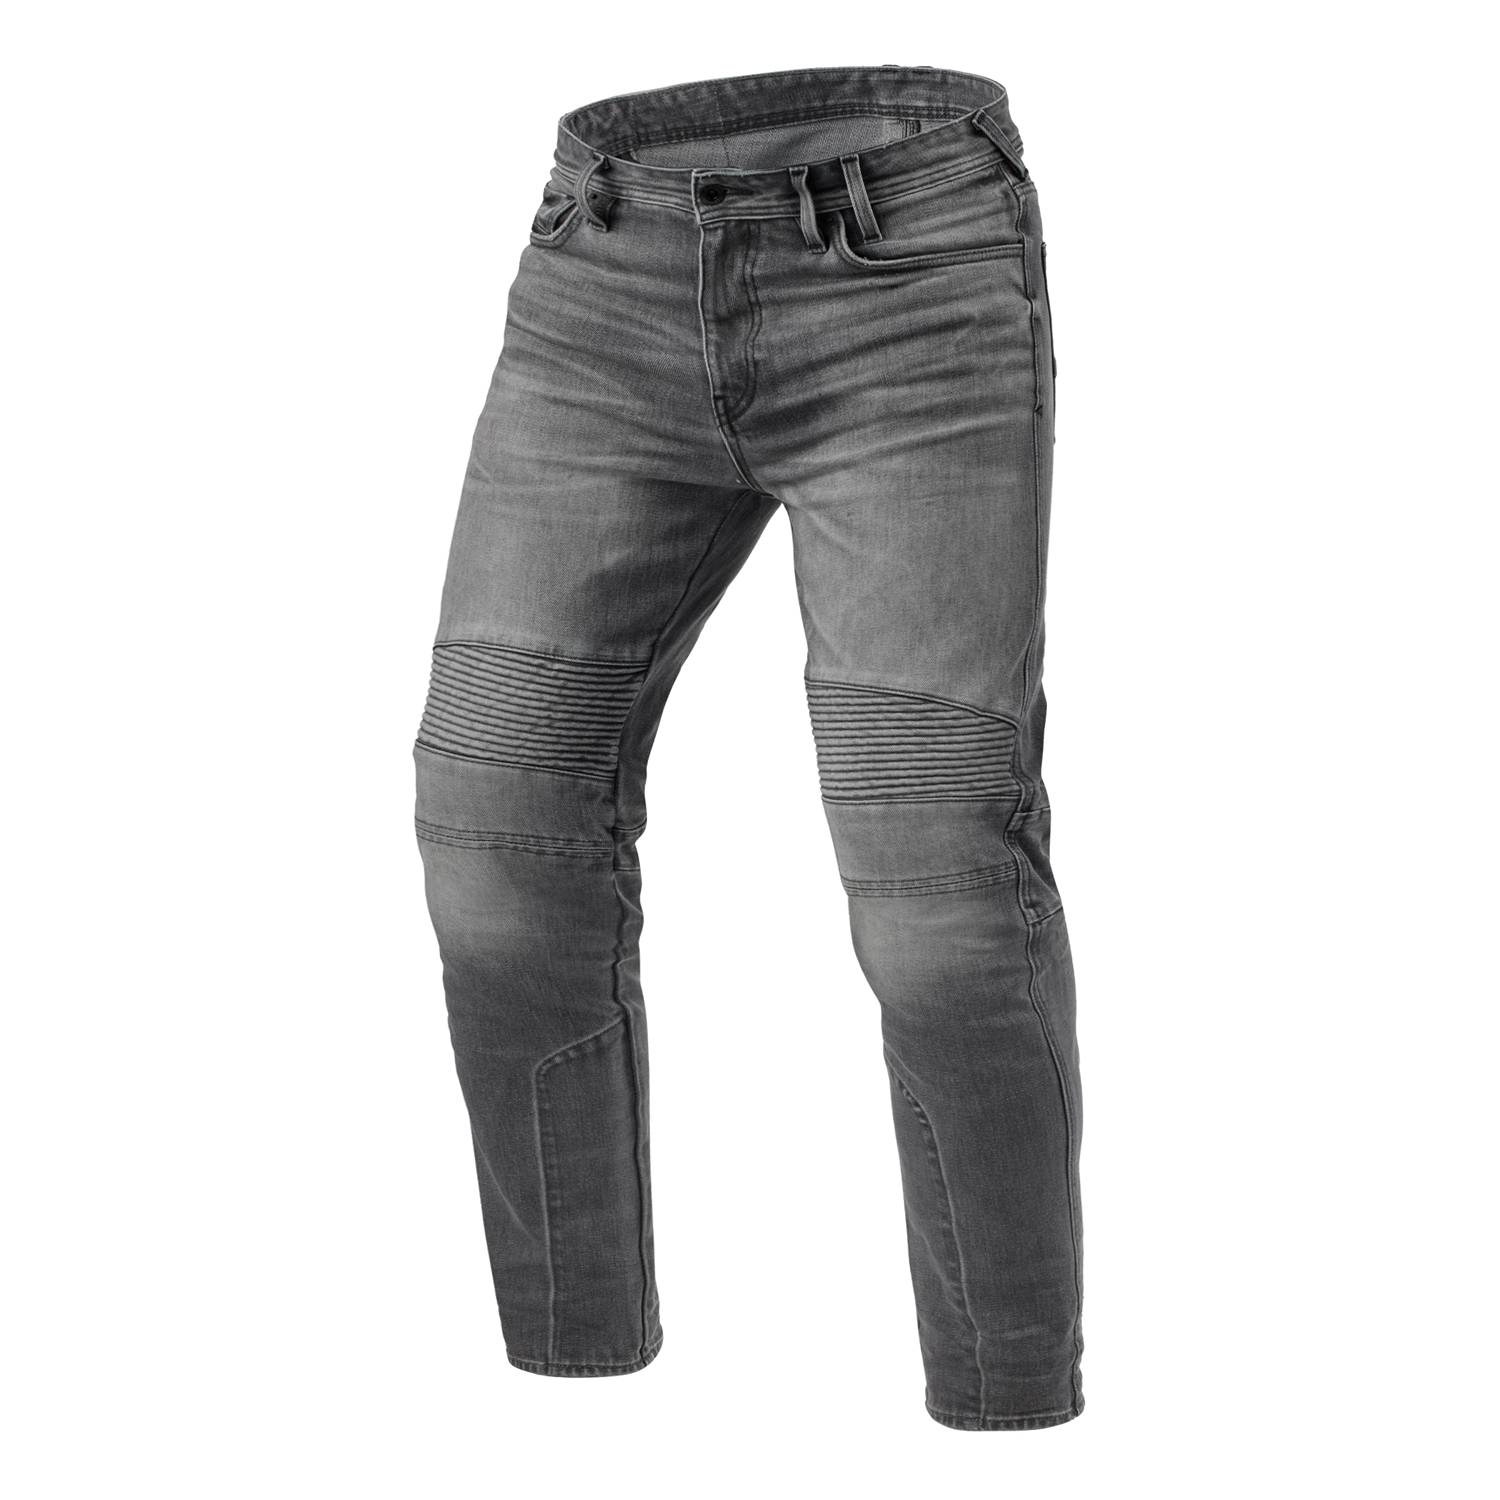 Image of REV'IT! Jeans Moto 2 TF Medium Grey Used L34 Motorcycle Jeans Size L34/W28 ID 8700001375498